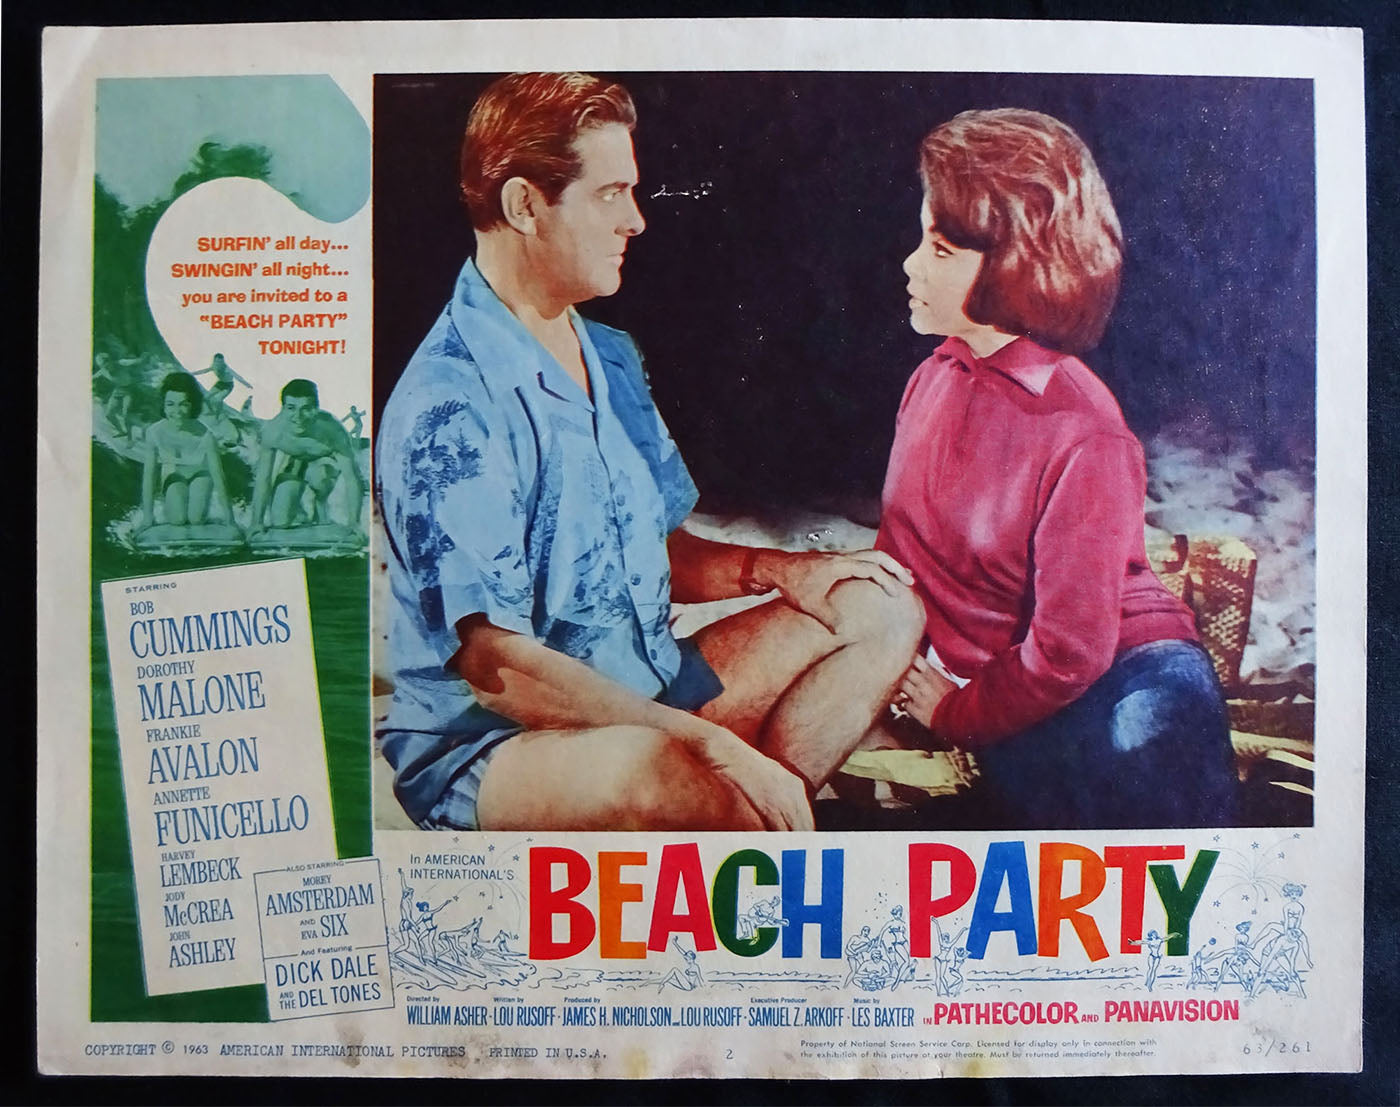 Beach Party (1963) Lobby Card (Fine Condition) Bob Cummings, Dorothy Malone, Frankie Avalon, Annette Funicello